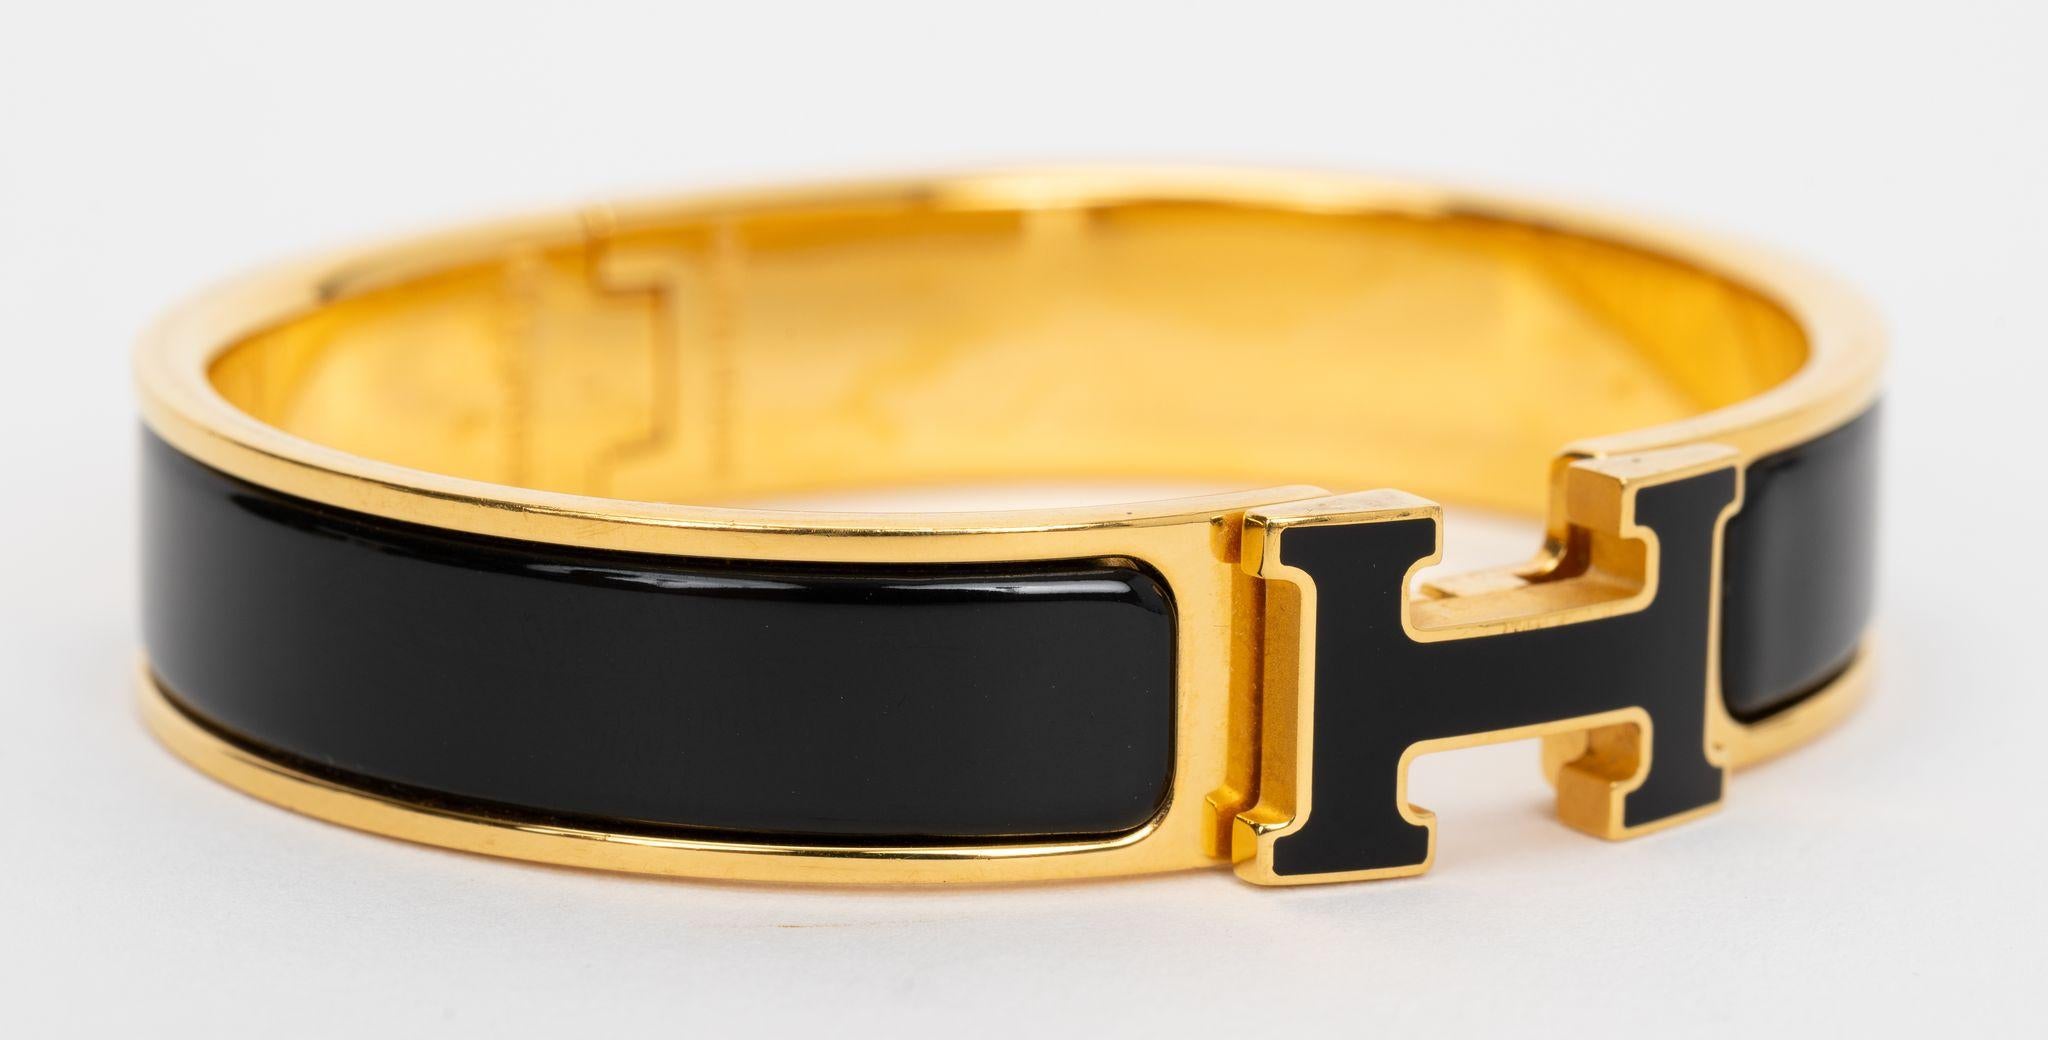 The Hermes Clic Clac H, narrow bracelet,  in black enamel with gold-plated hardware.
Size PM, new in unworn condition, comes with velvet pouch.